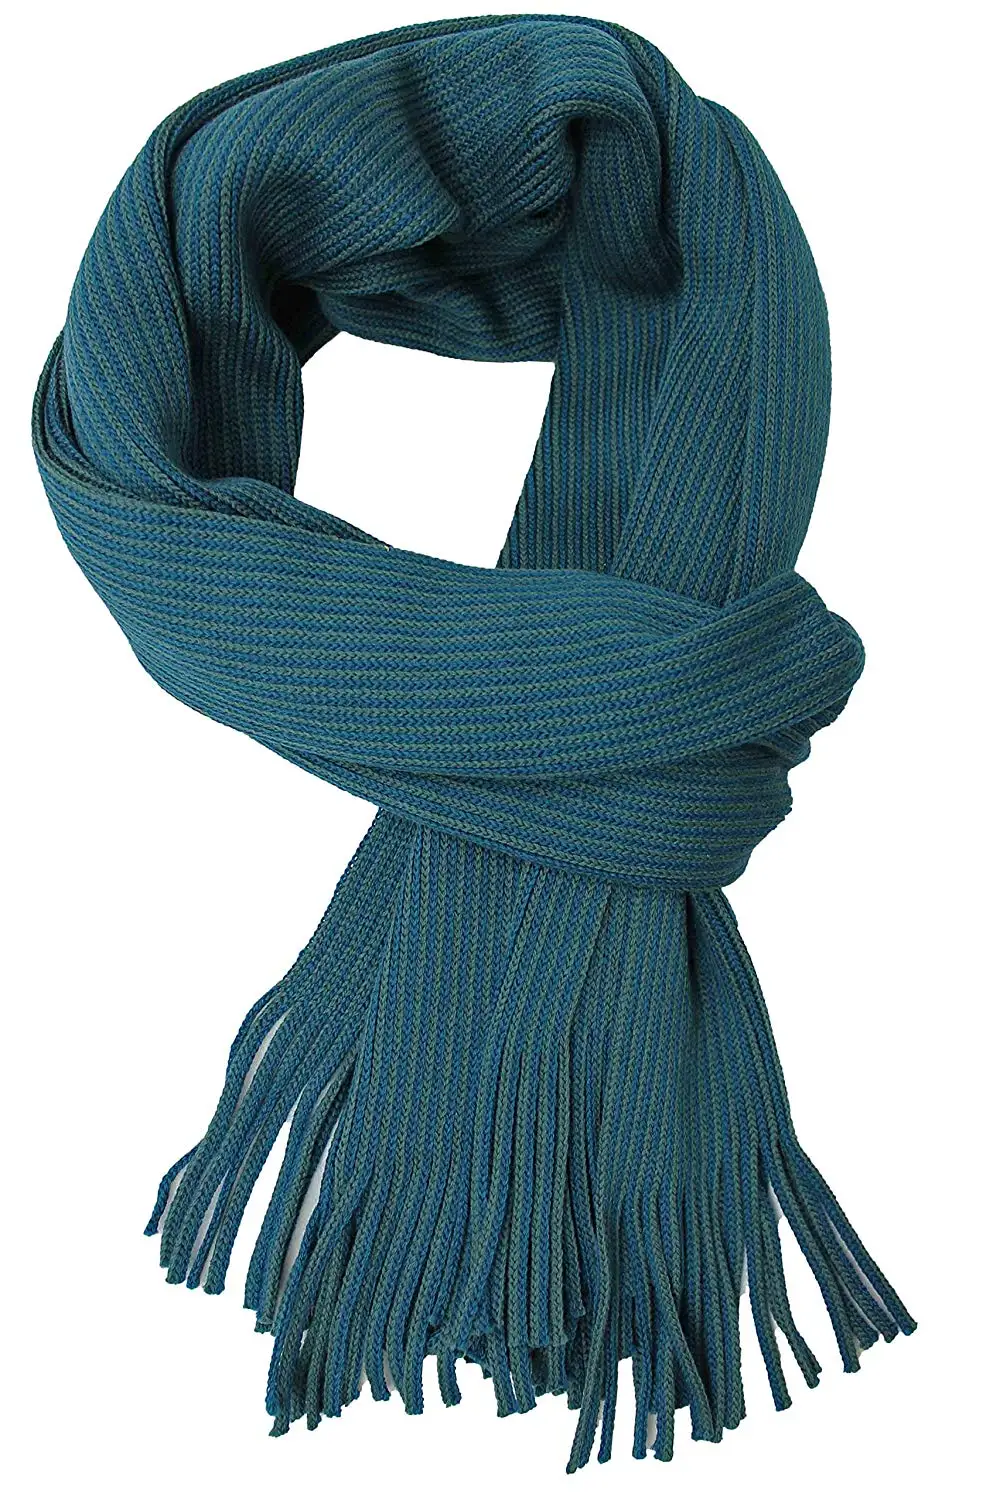 Stylish Scarf for Women and Girls with Shining Threads Around Edges Lovarzi Womens Square Scarf